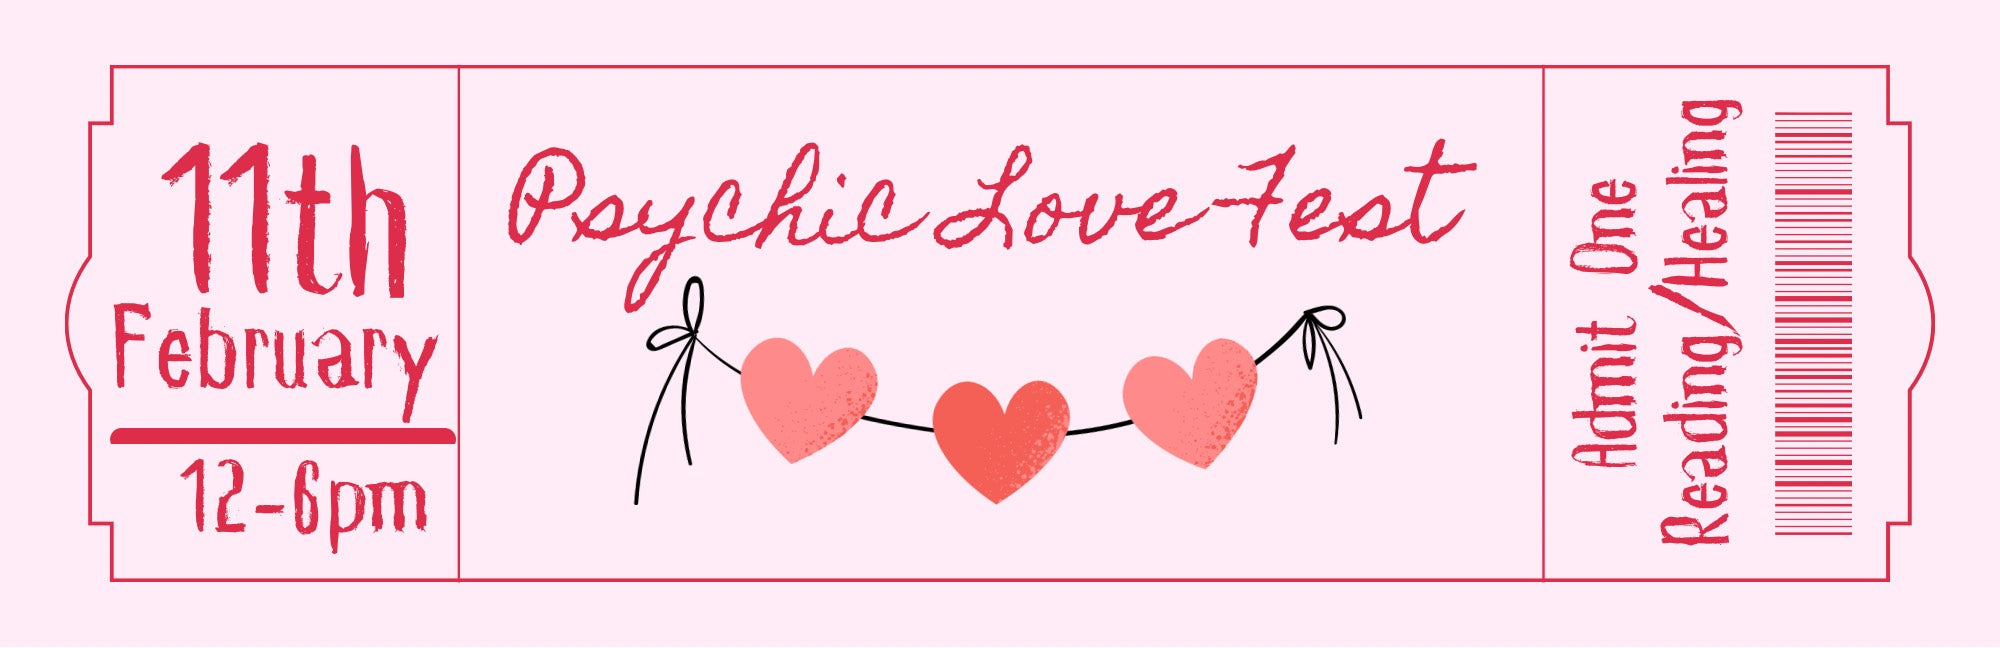 Tickets for Psychic Love Fest